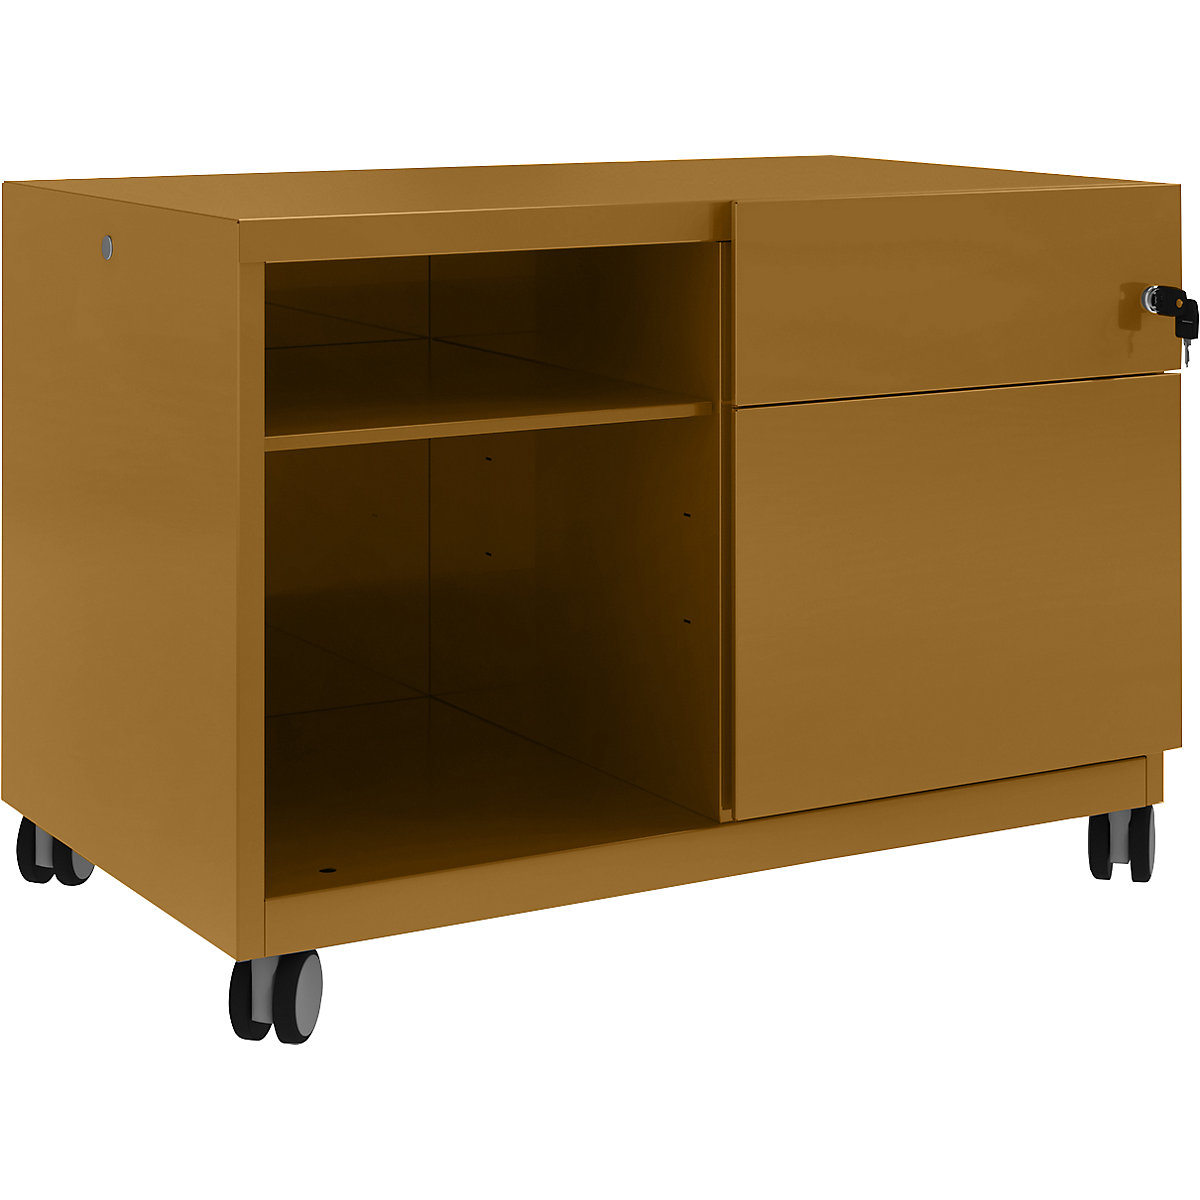 Note™ CADDY, HxBxT 563 x 800 x 490 mm – BISLEY, 1 universal drawer and suspension file drawer on the right, dijon-20